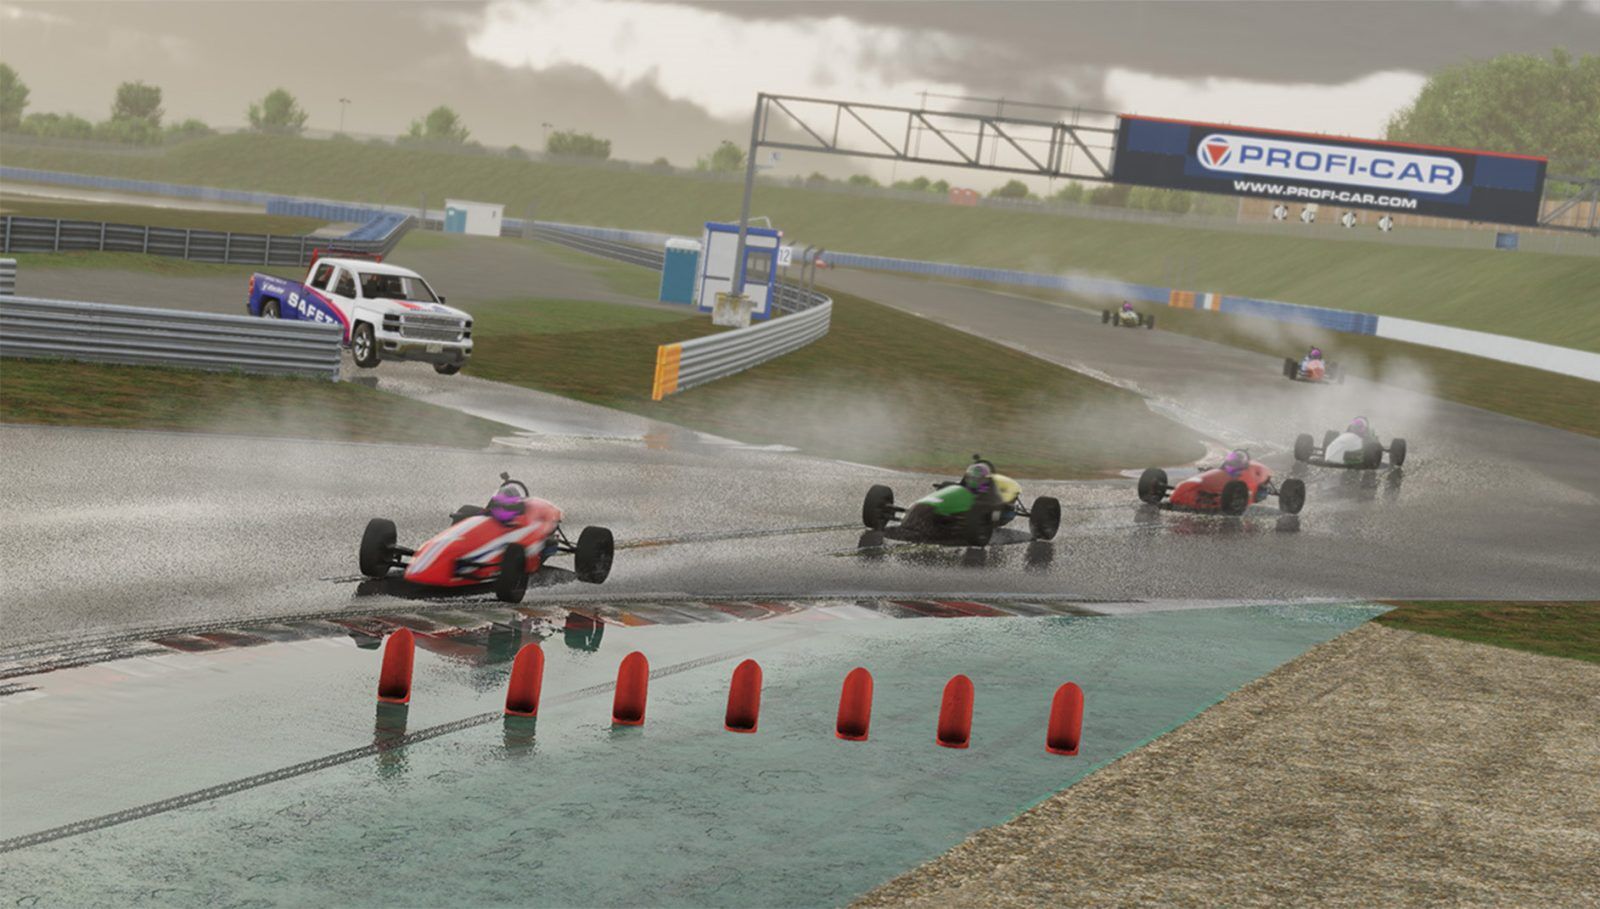 The iRacing development update for July brings lots of information about the game's future, including rain and new tracks